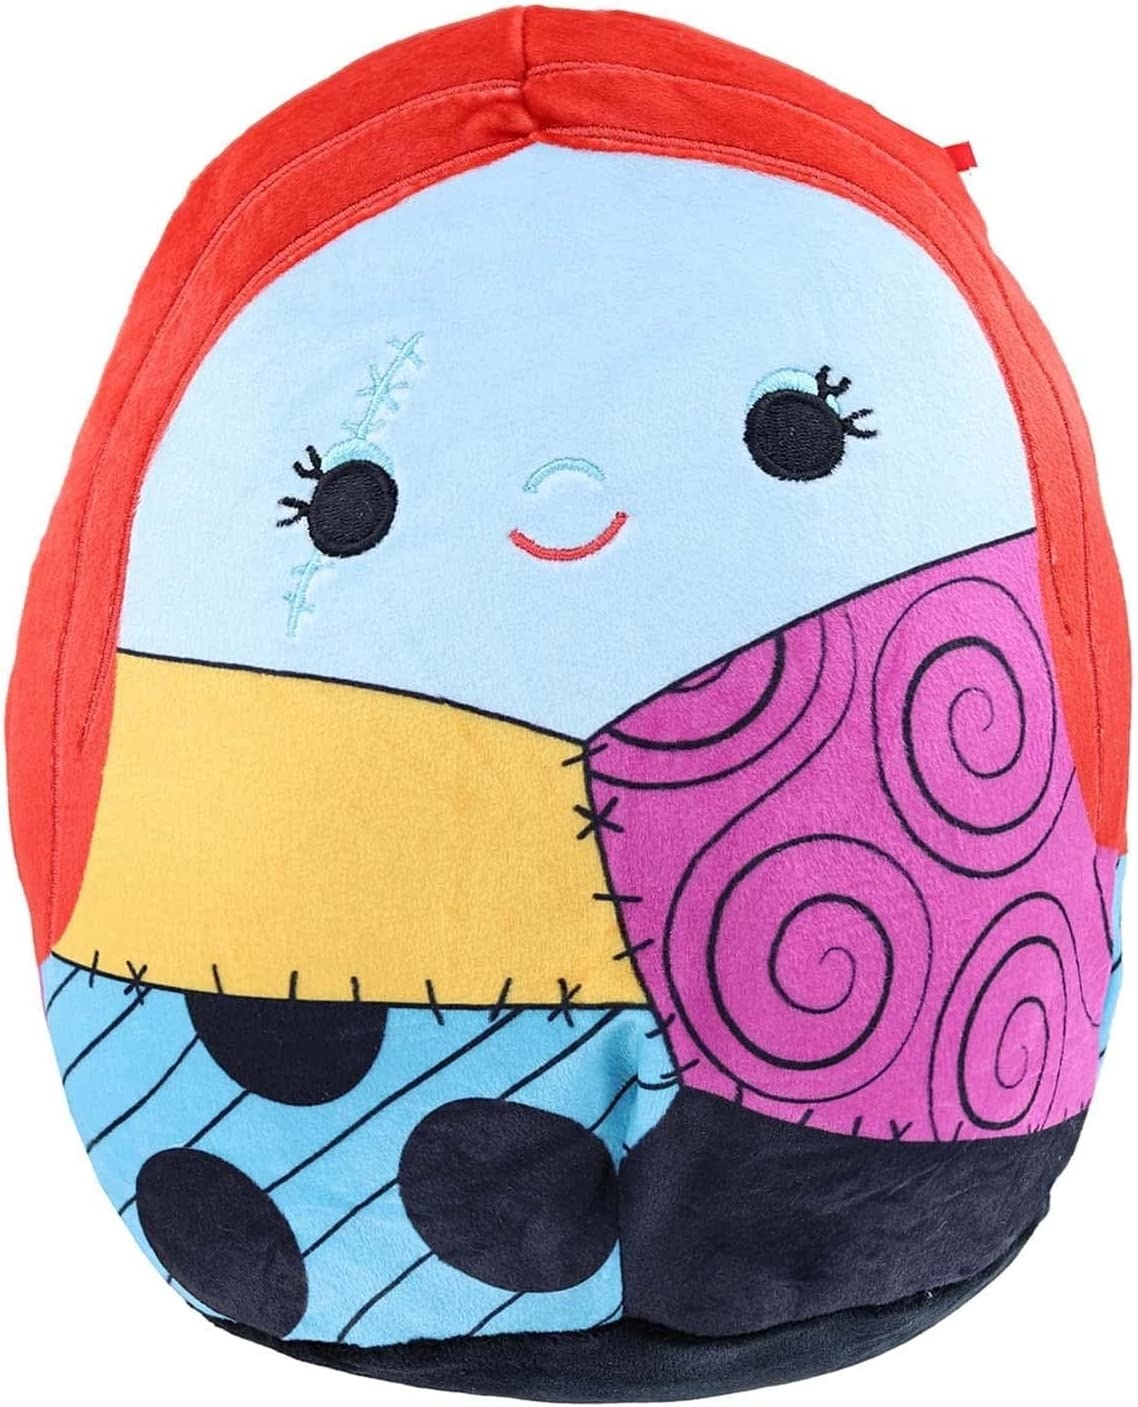 Sally-shaped Squishmallow with orange hair and blue skin and a quilted patchwork patterned outfit